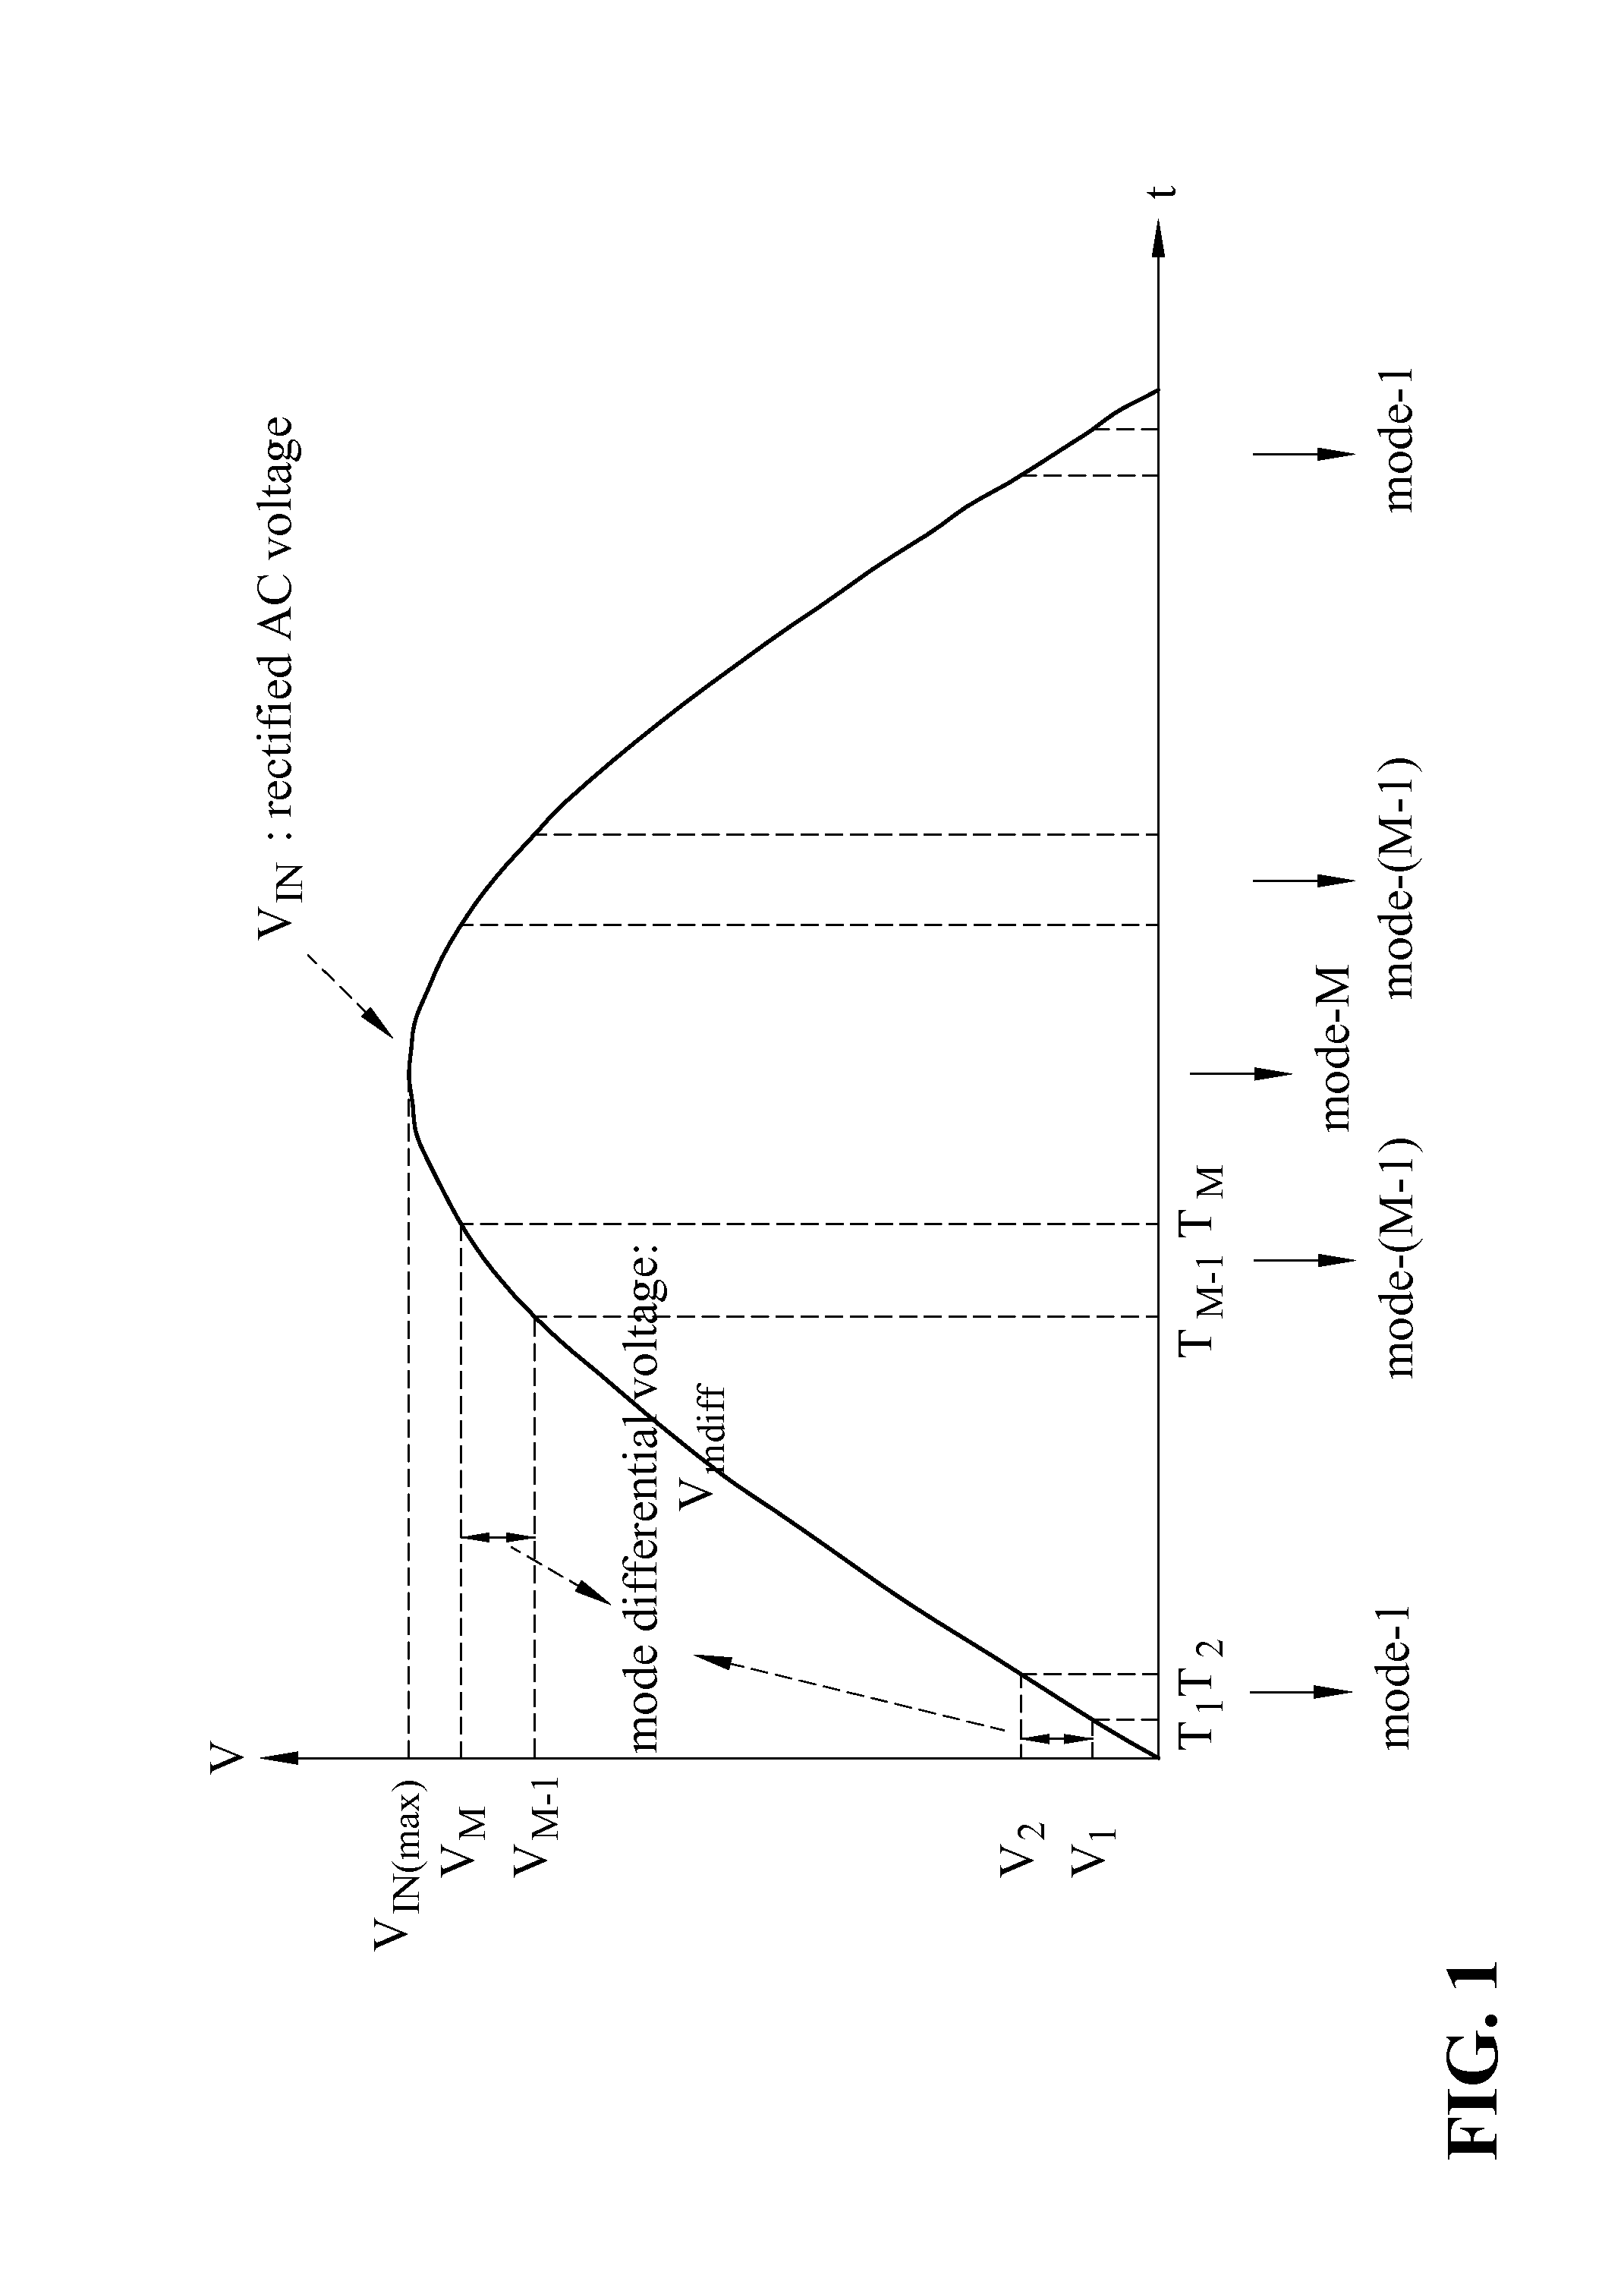 Apparatus for driving a plurality of segments of led-based lighting units